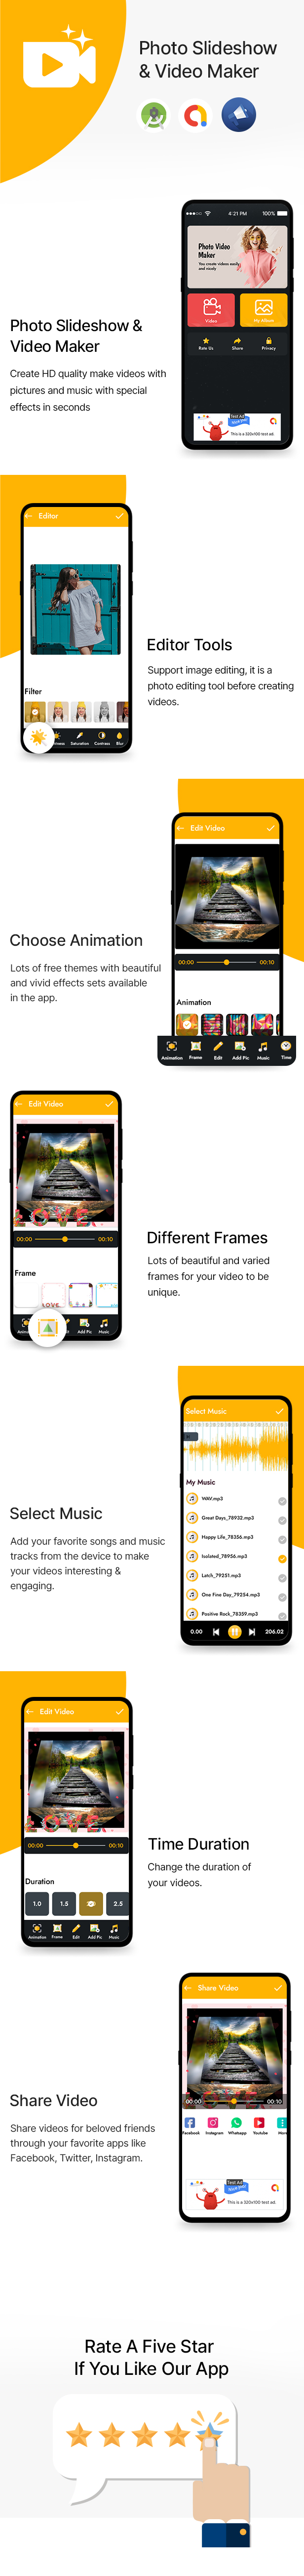 Photo Slideshow & Video Maker for Android App - 6